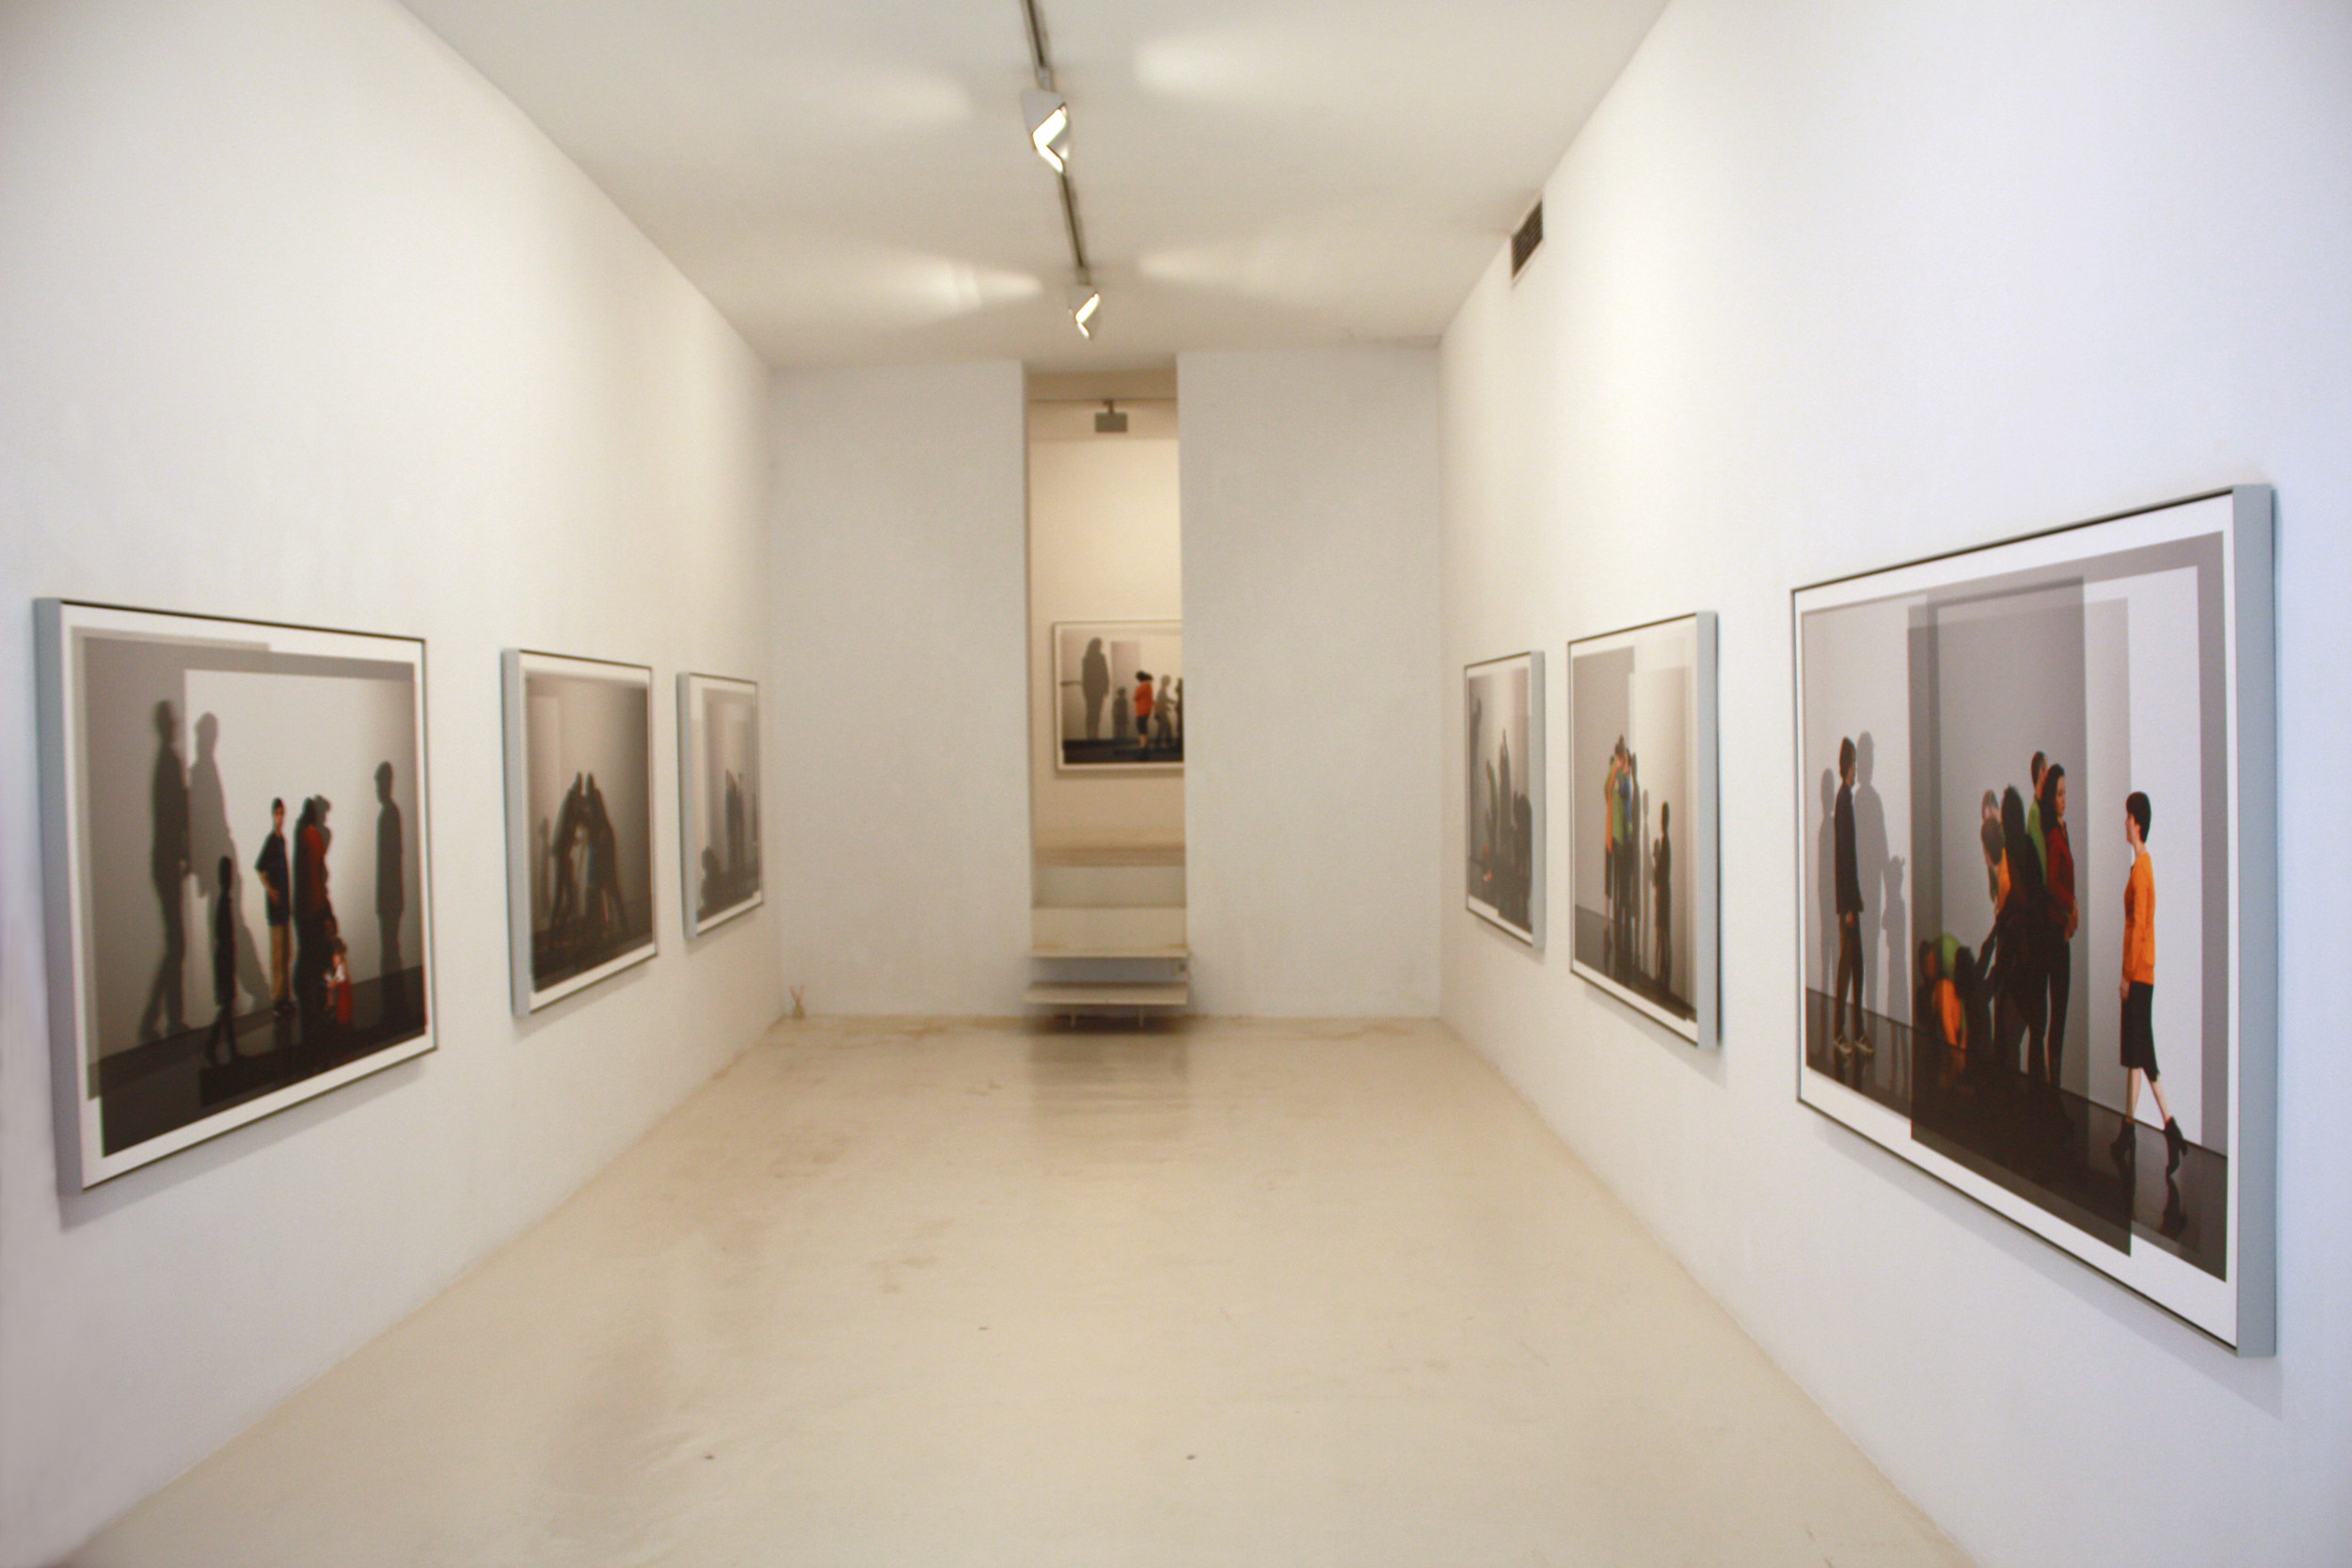 Exhibition view in the Galería Maior of Palma, 2012